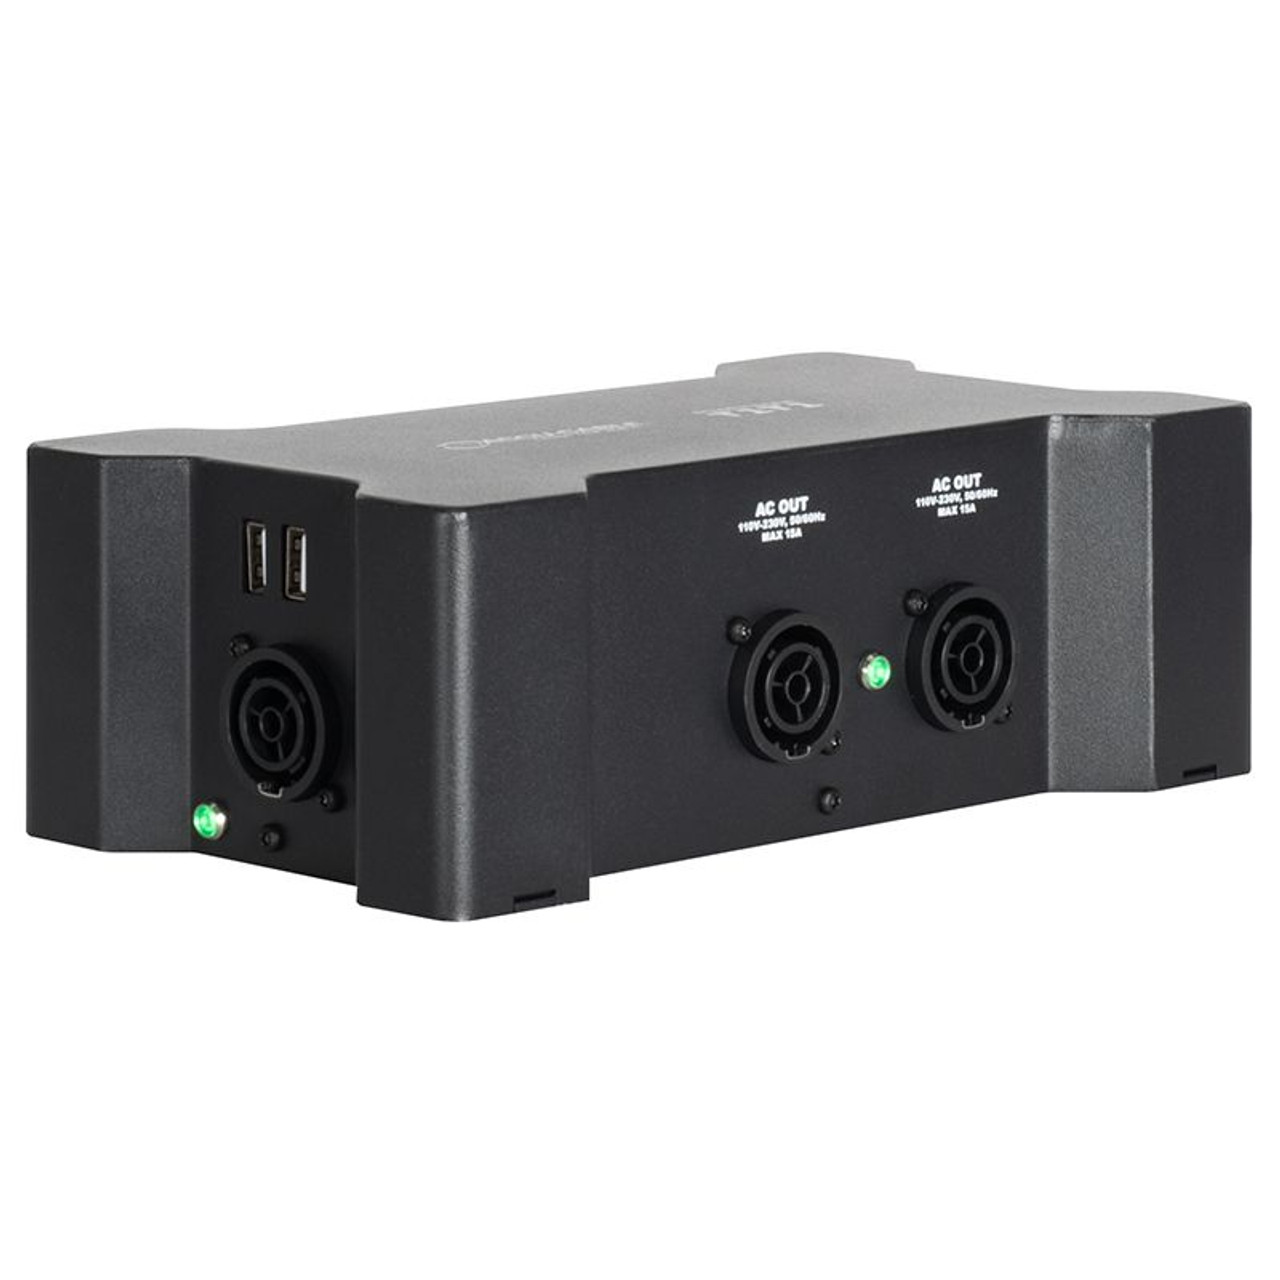 Accu-Cable Power Bone T1T1 Power Distribution Box with Seetronic (Power Bone T1T1)